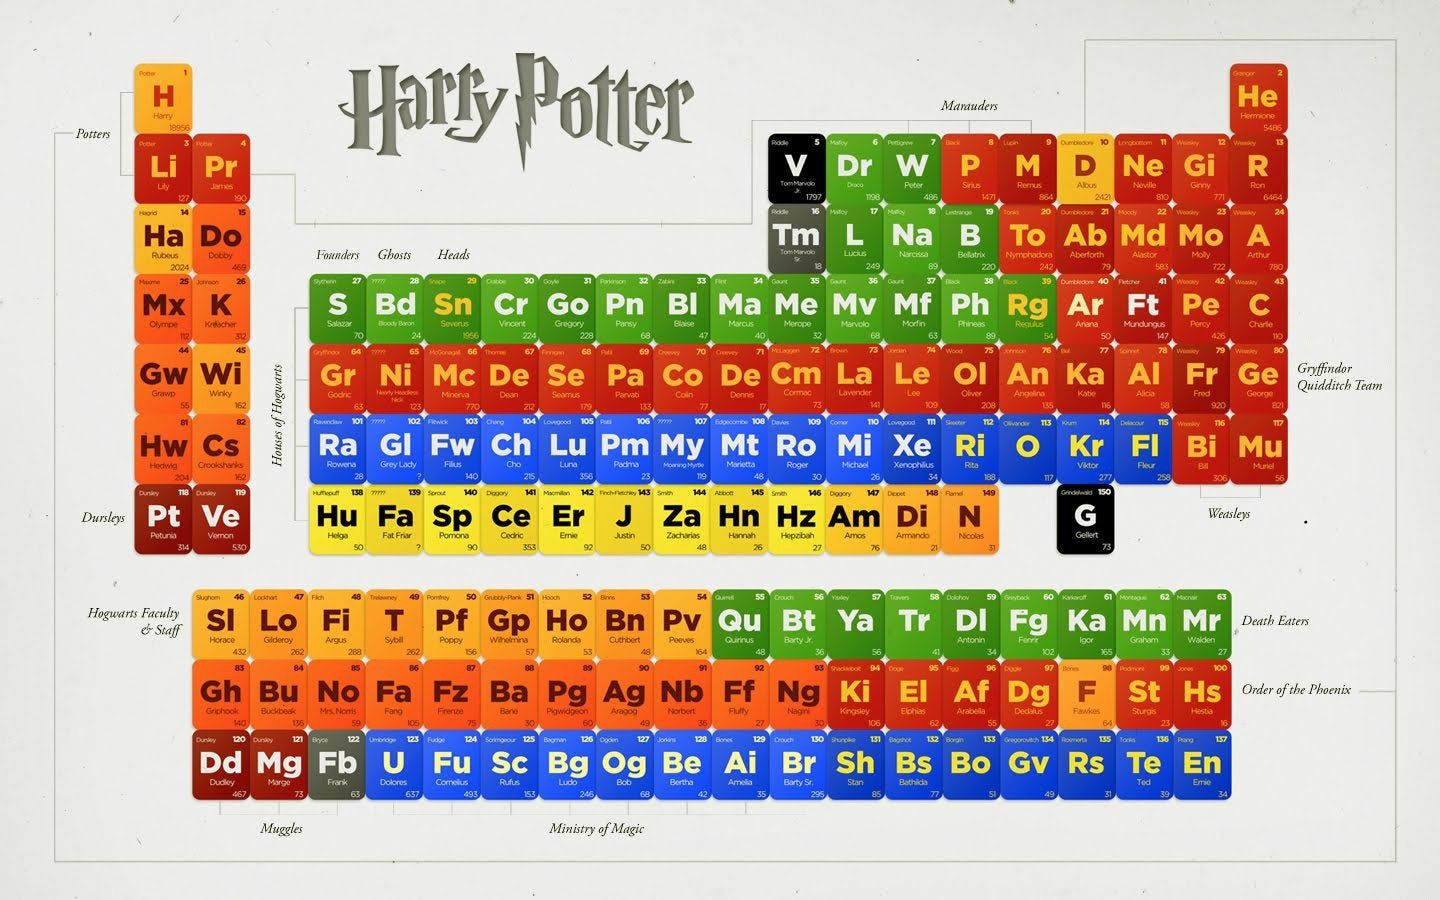 The Harry Potter Periodic table